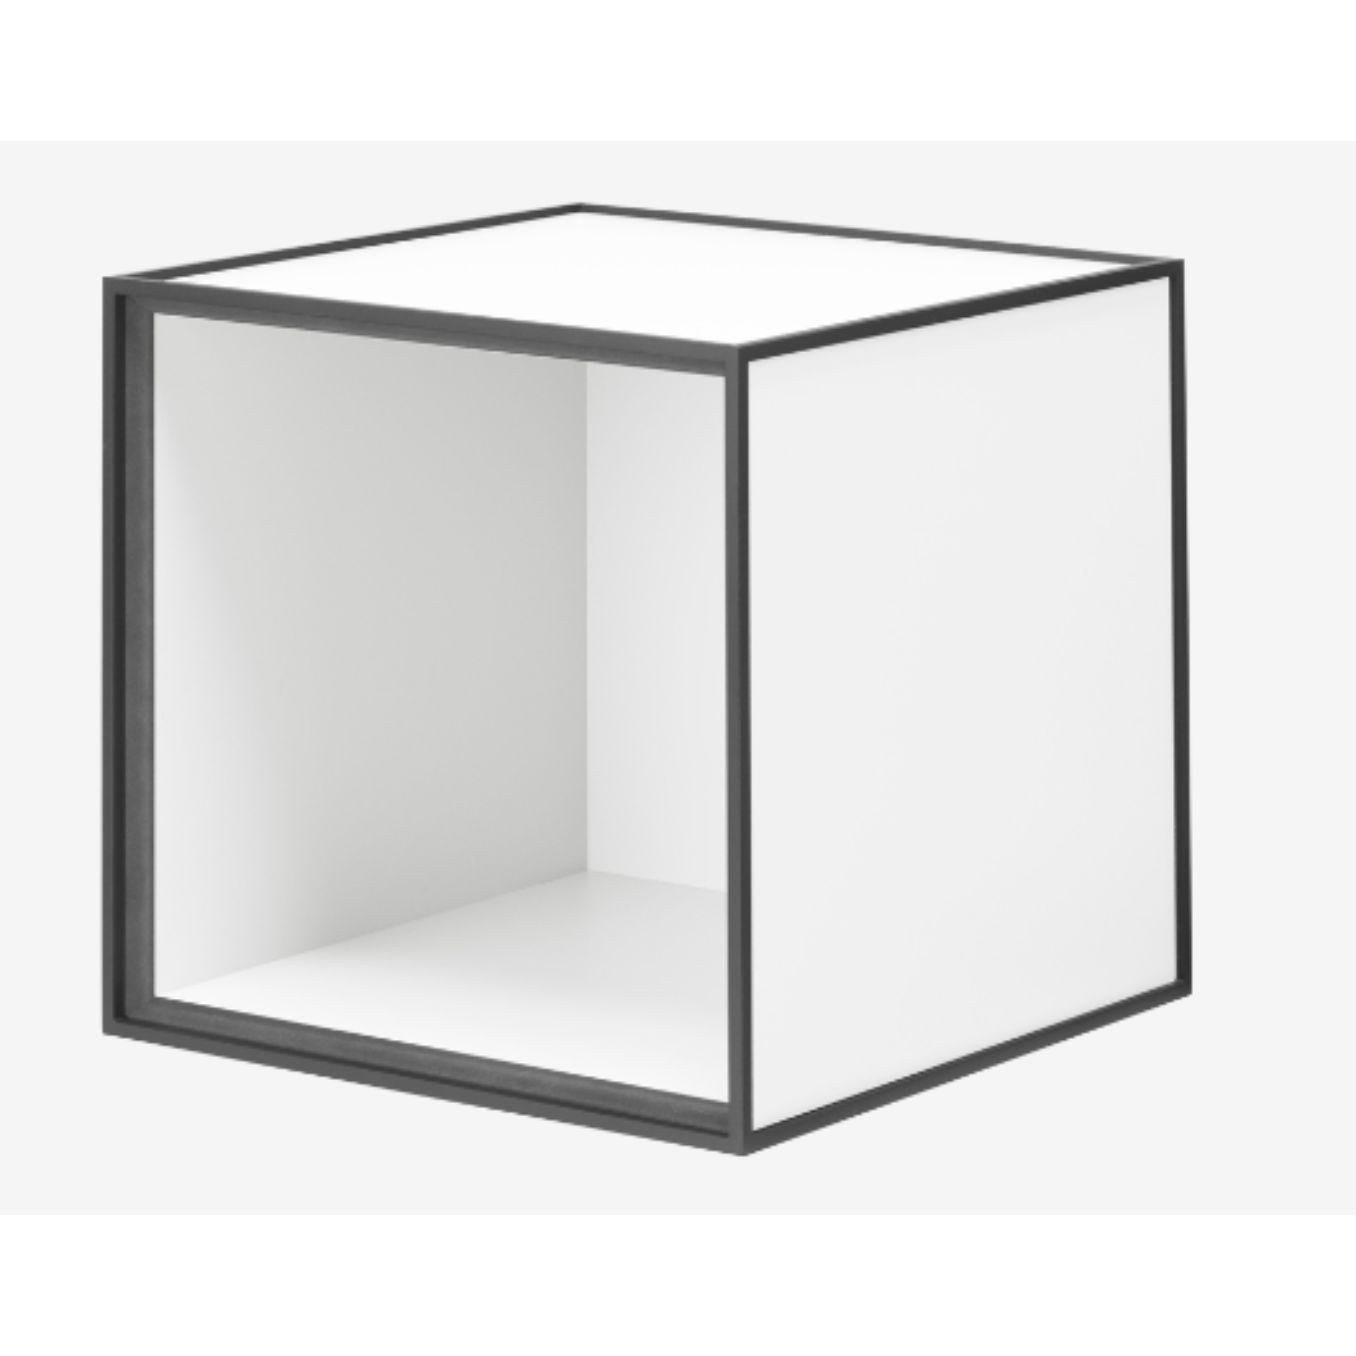 28 white frame box by Lassen
Dimensions: W 28 x D 28 x H 28 cm 
Materials: Finér, Melamin, Melamin, Melamine, Metal, Veneer, Oak
Also available in different colors and dimensions. 

By Lassen is a Danish design brand focused on iconic designs